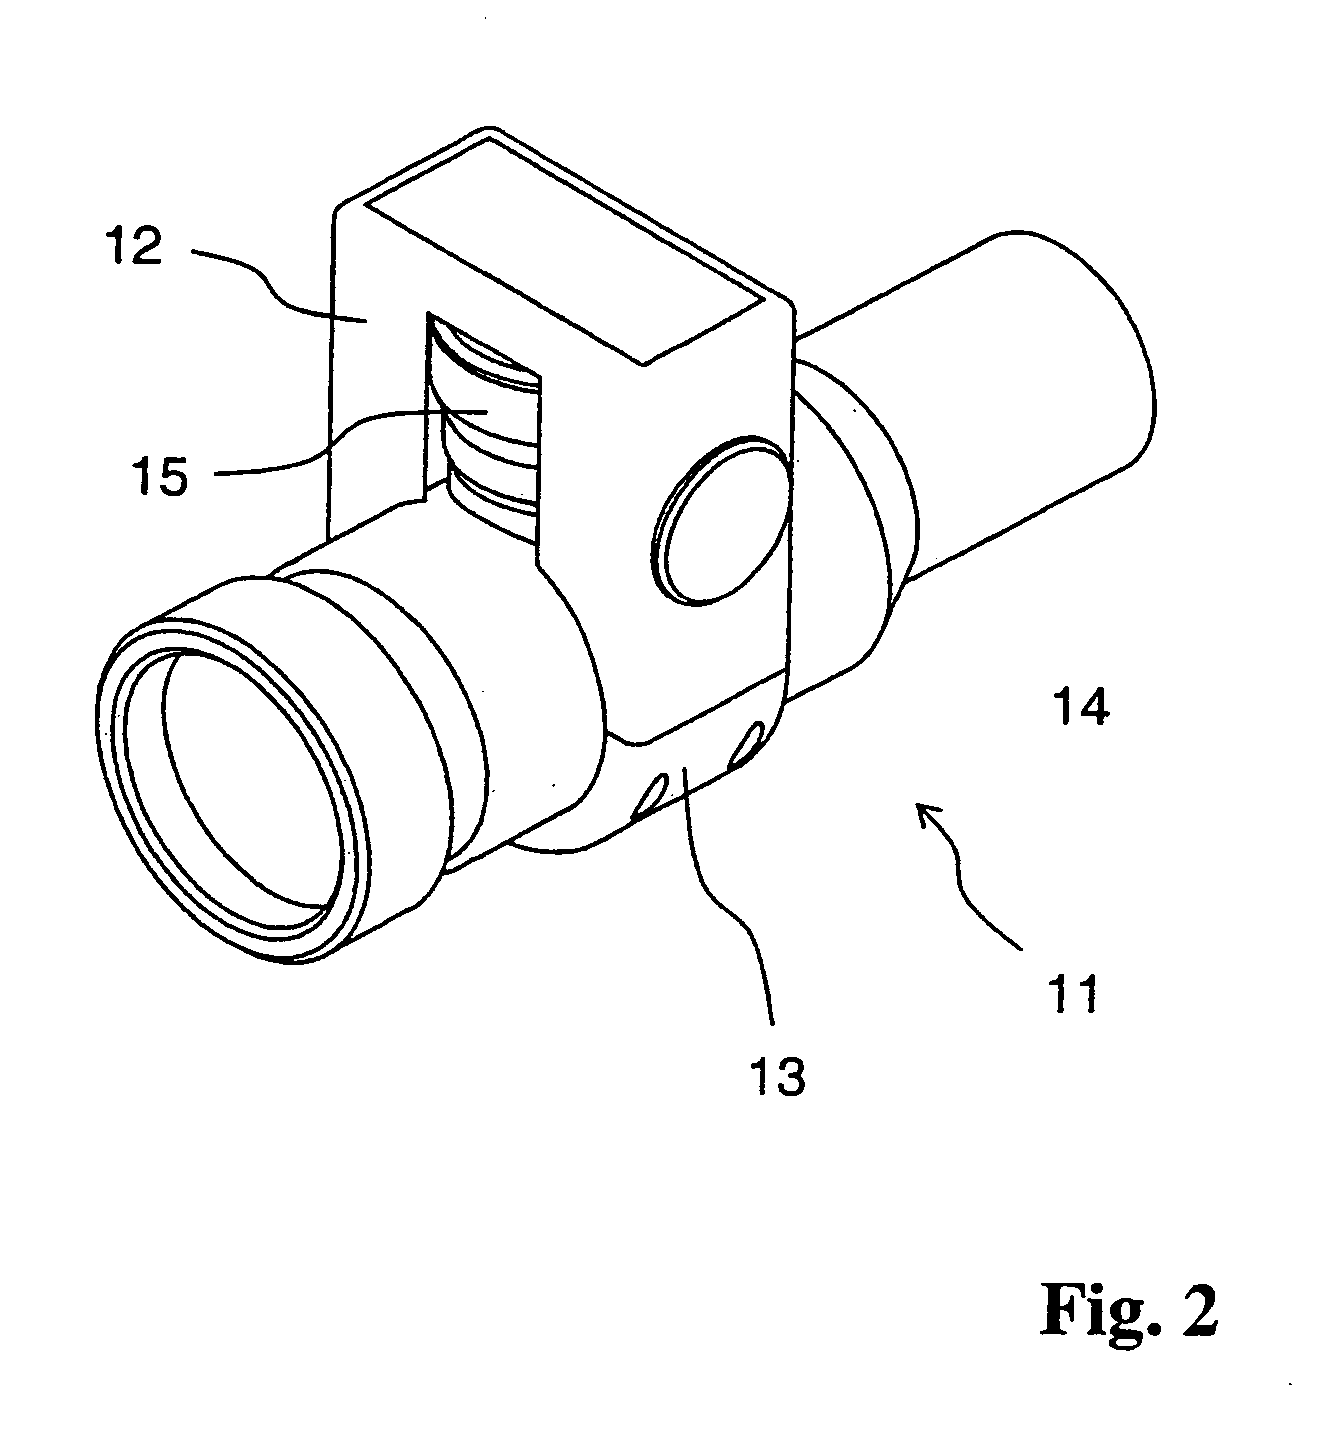 Sighting device for a firearm